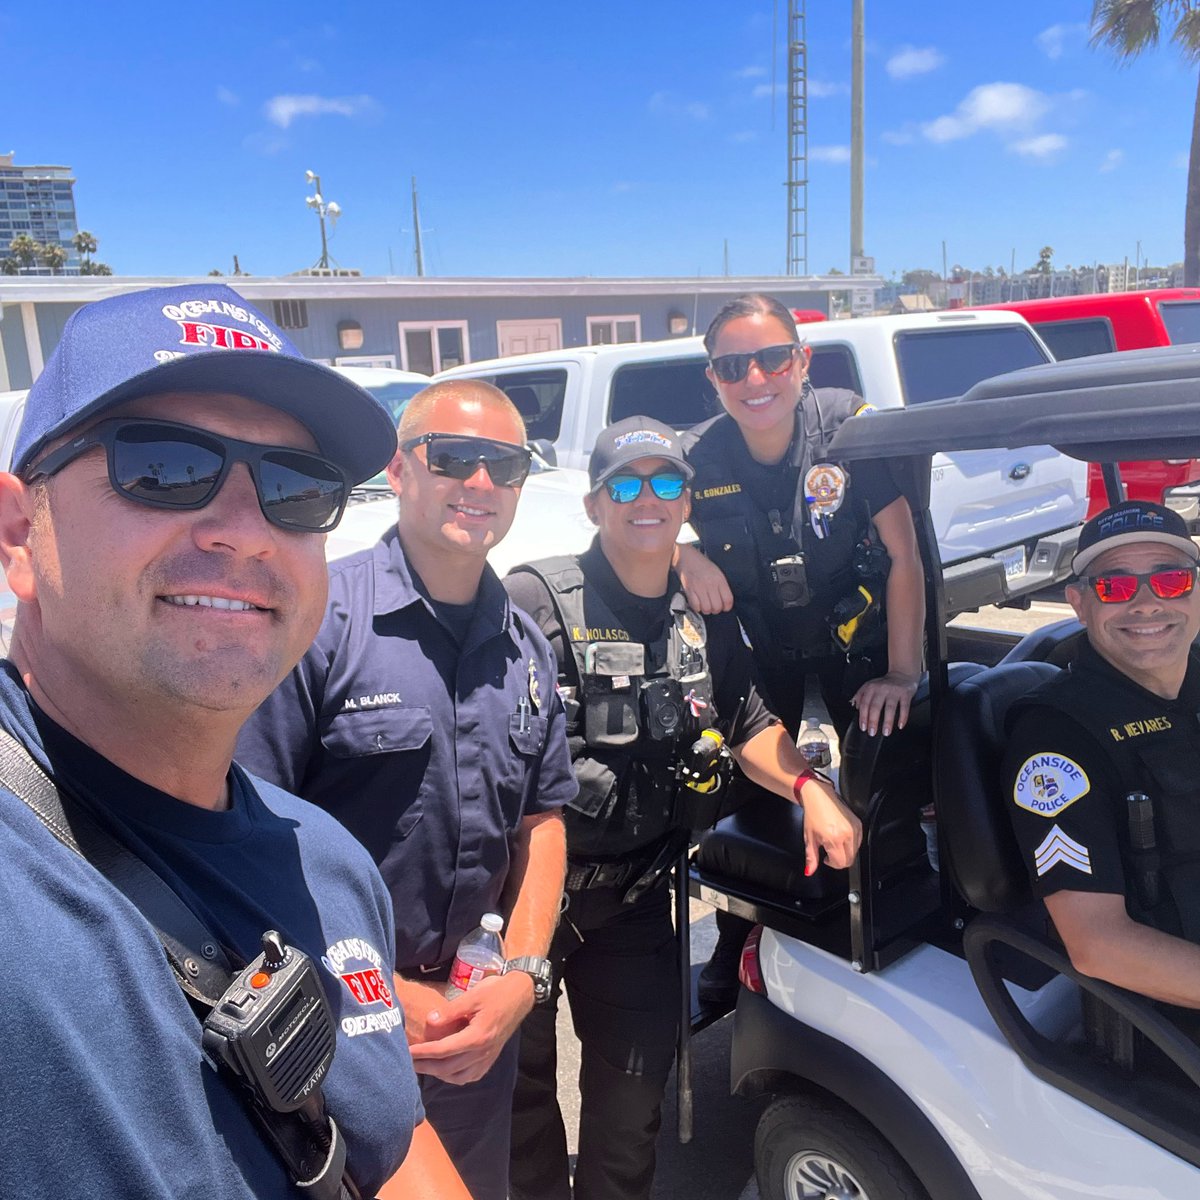 Here with a few of our friends at the Oceanside Fire Department with one simple ask…

Put the fireworks down friends.

We want you to keep all your digits. Drought conditions are real. Let’s keep the city safe from fire danger. Leave the pyrotechnics 🧨 to the pros.

#oceanside